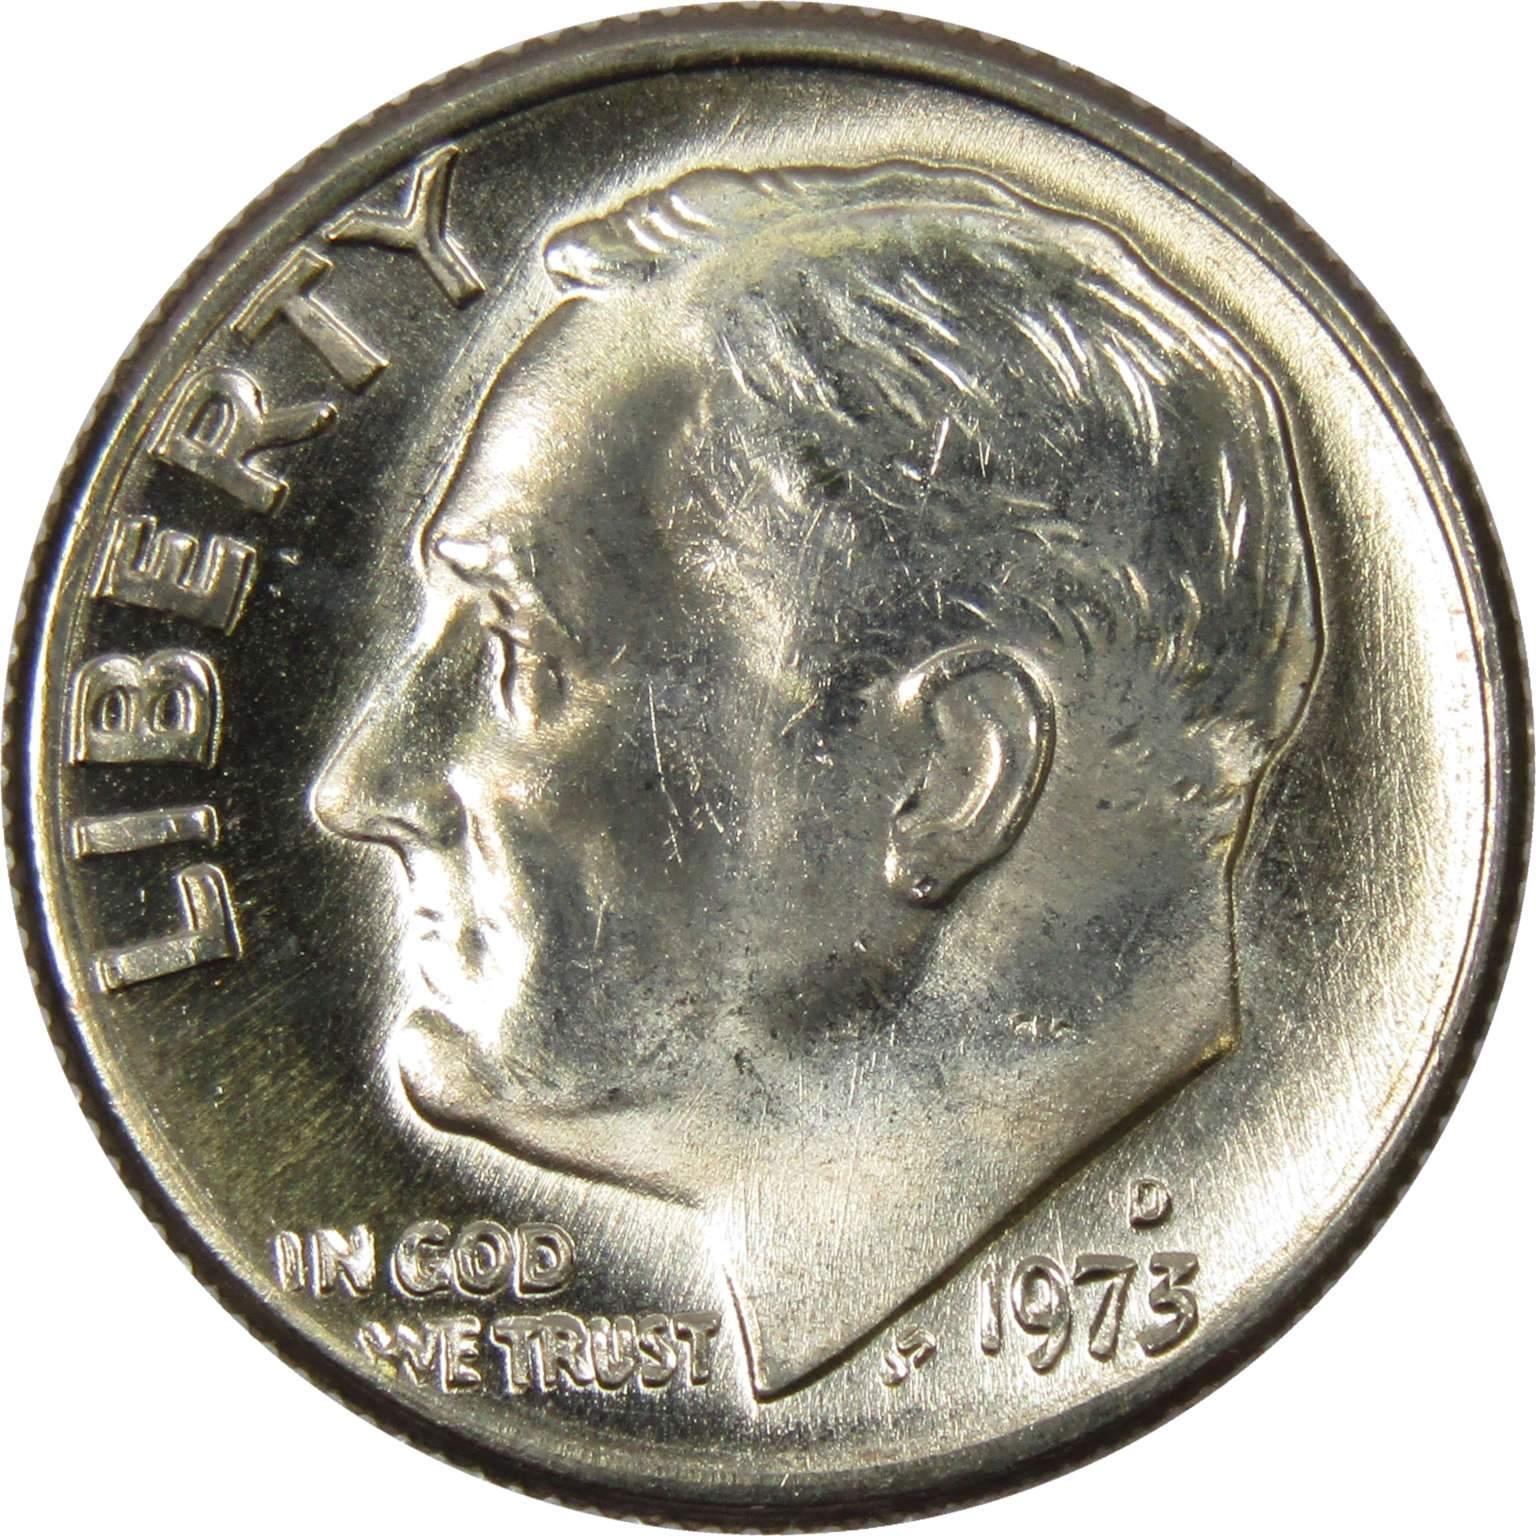 1973 D Roosevelt Dime BU Uncirculated Mint State 10c US Coin Collectible